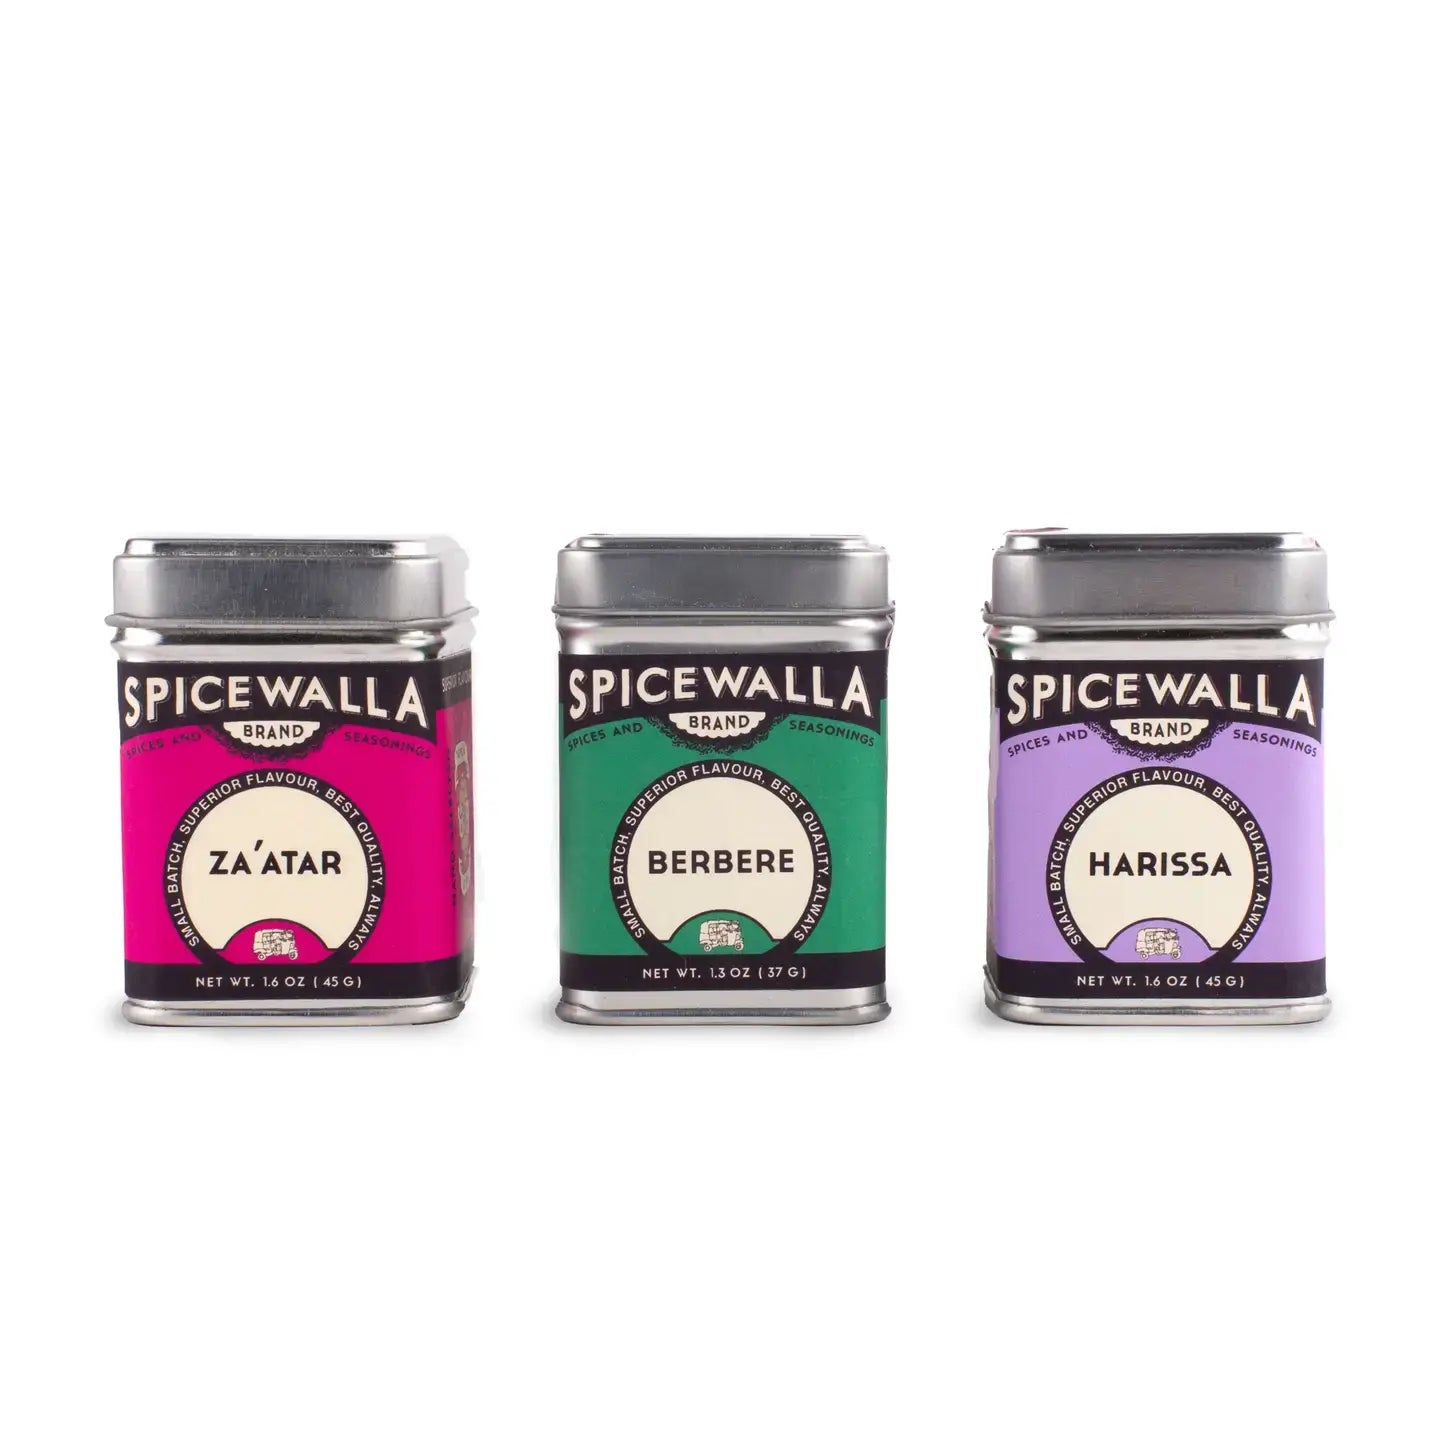 The Middle Eastern Collection from Spicewalla contains 3 spices: Zaatar, Berbere, and Harissa spices in small tins.